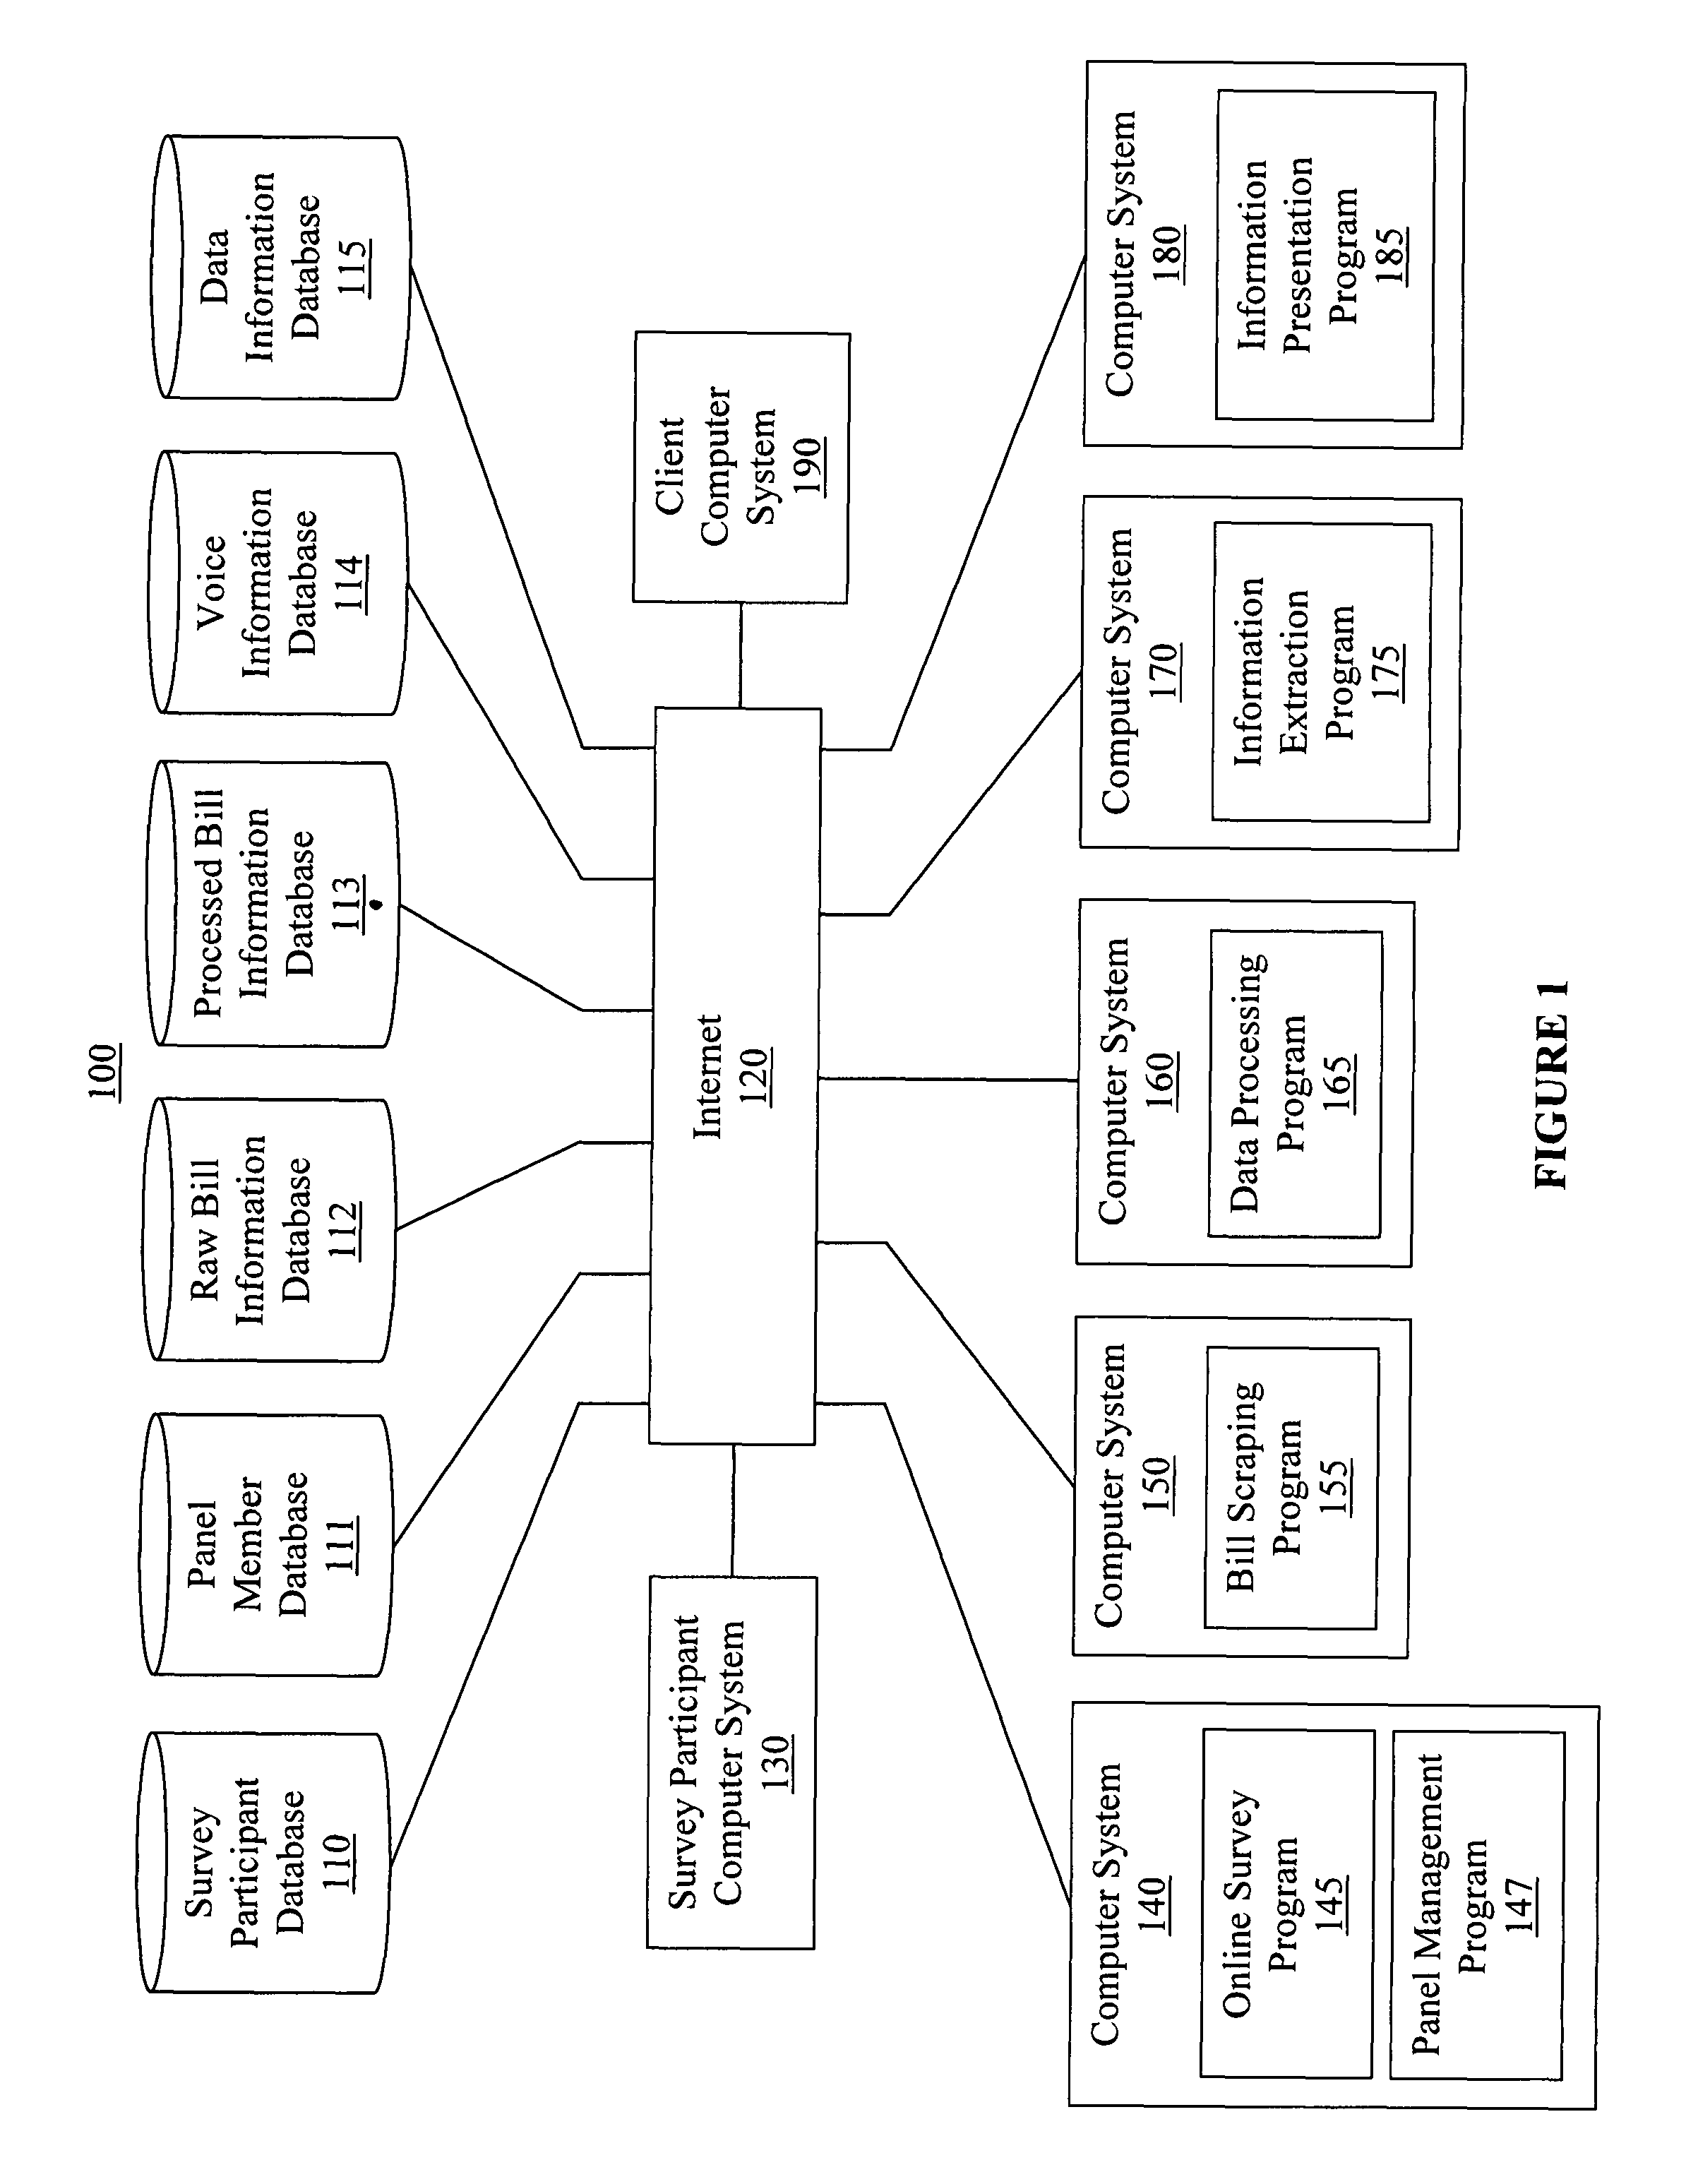 Method and system for providing market analysis for wireless data markets